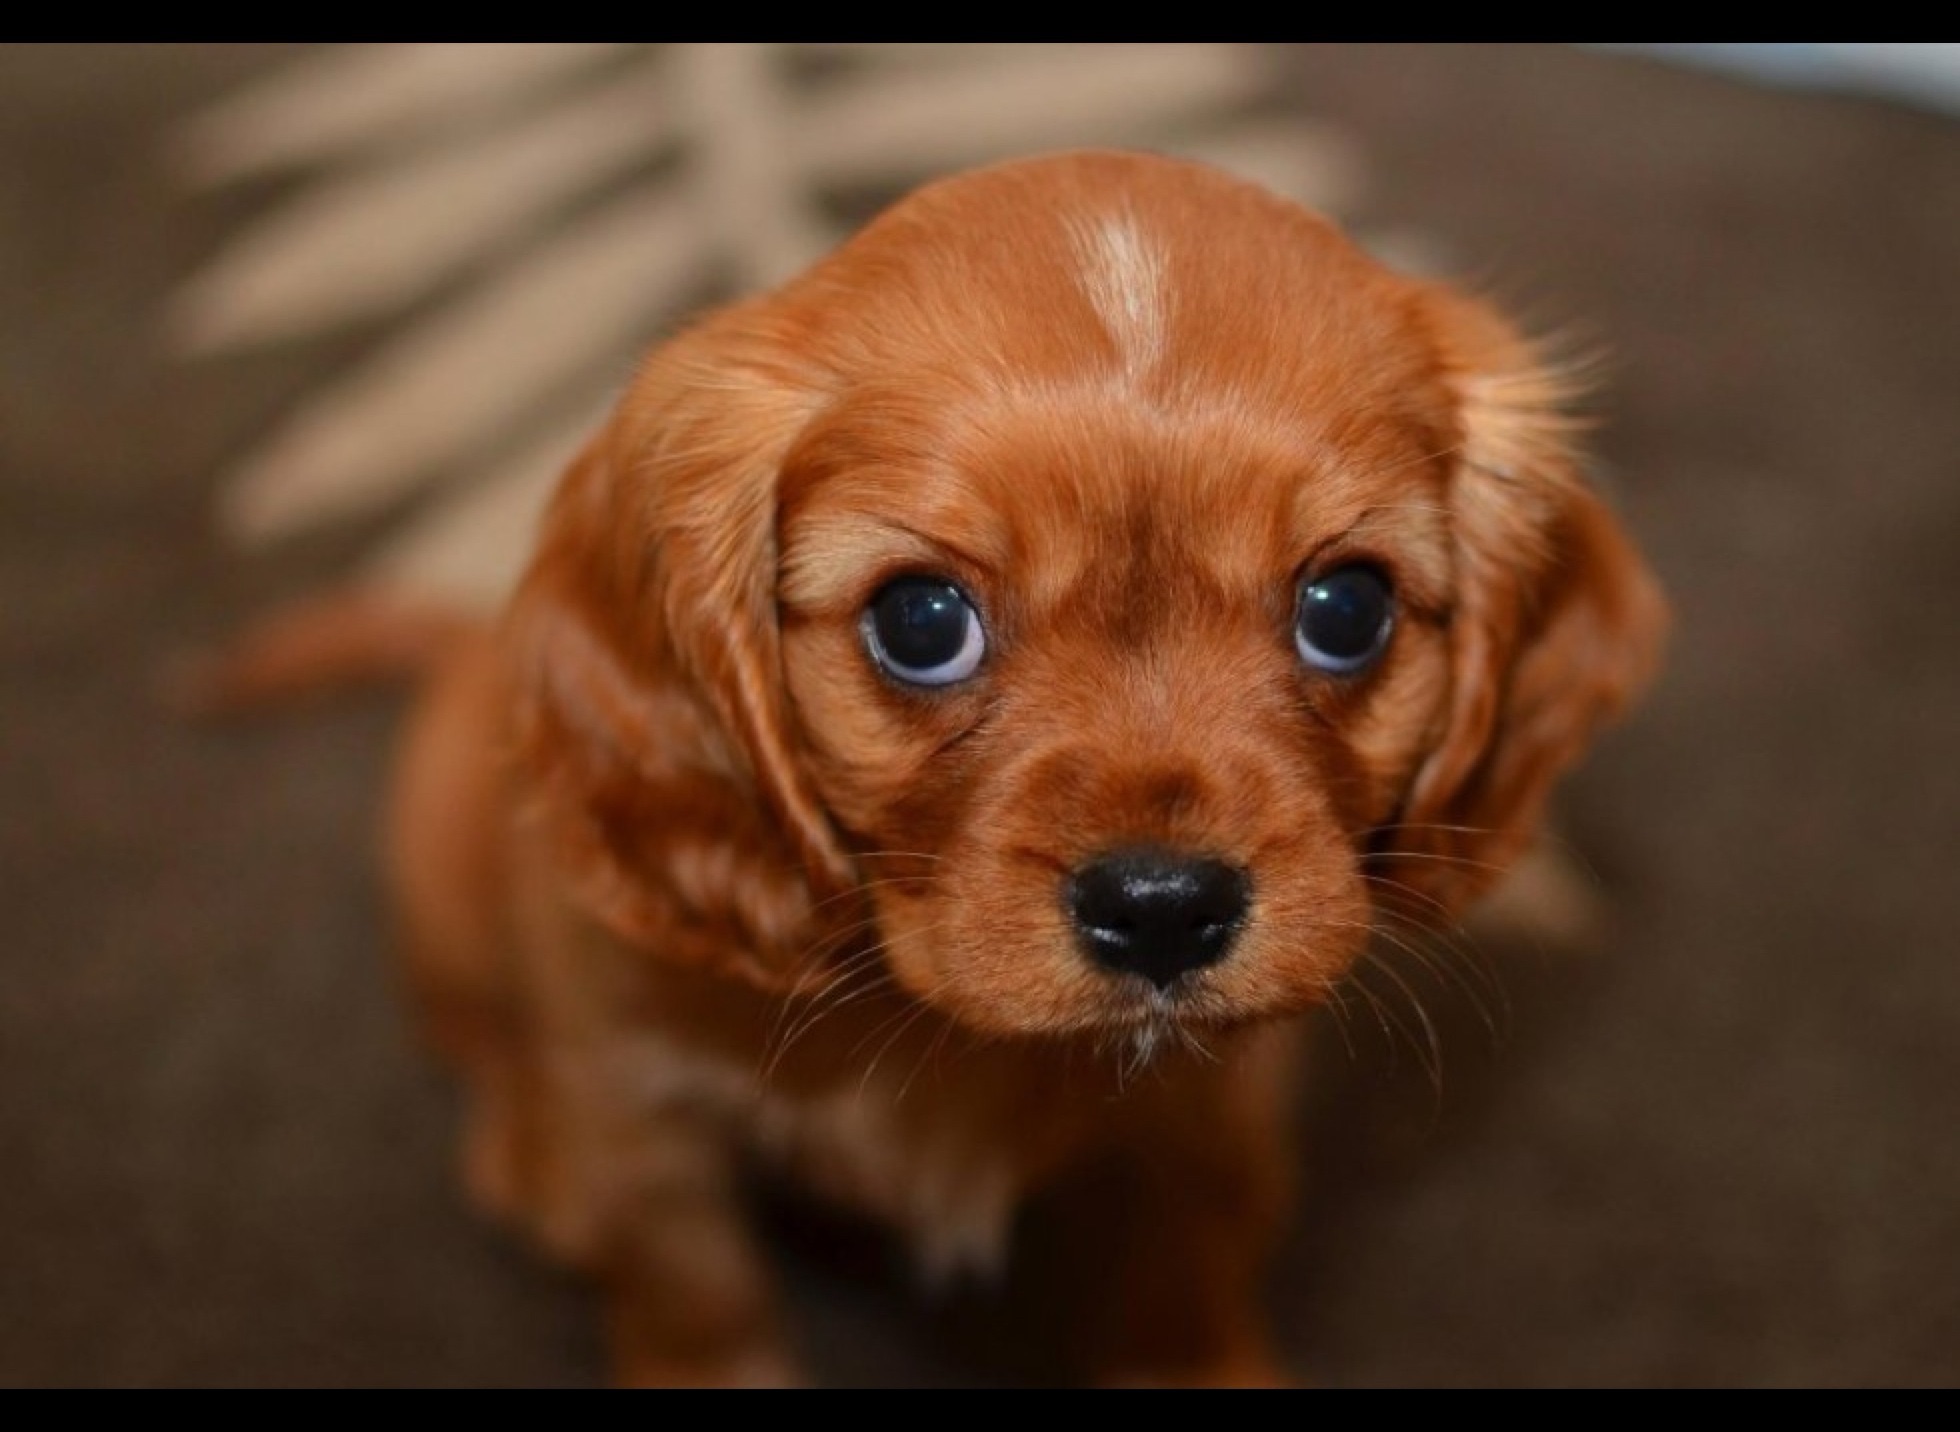 This is literally the photo that came up when I searched for “cutest puppy ever”.